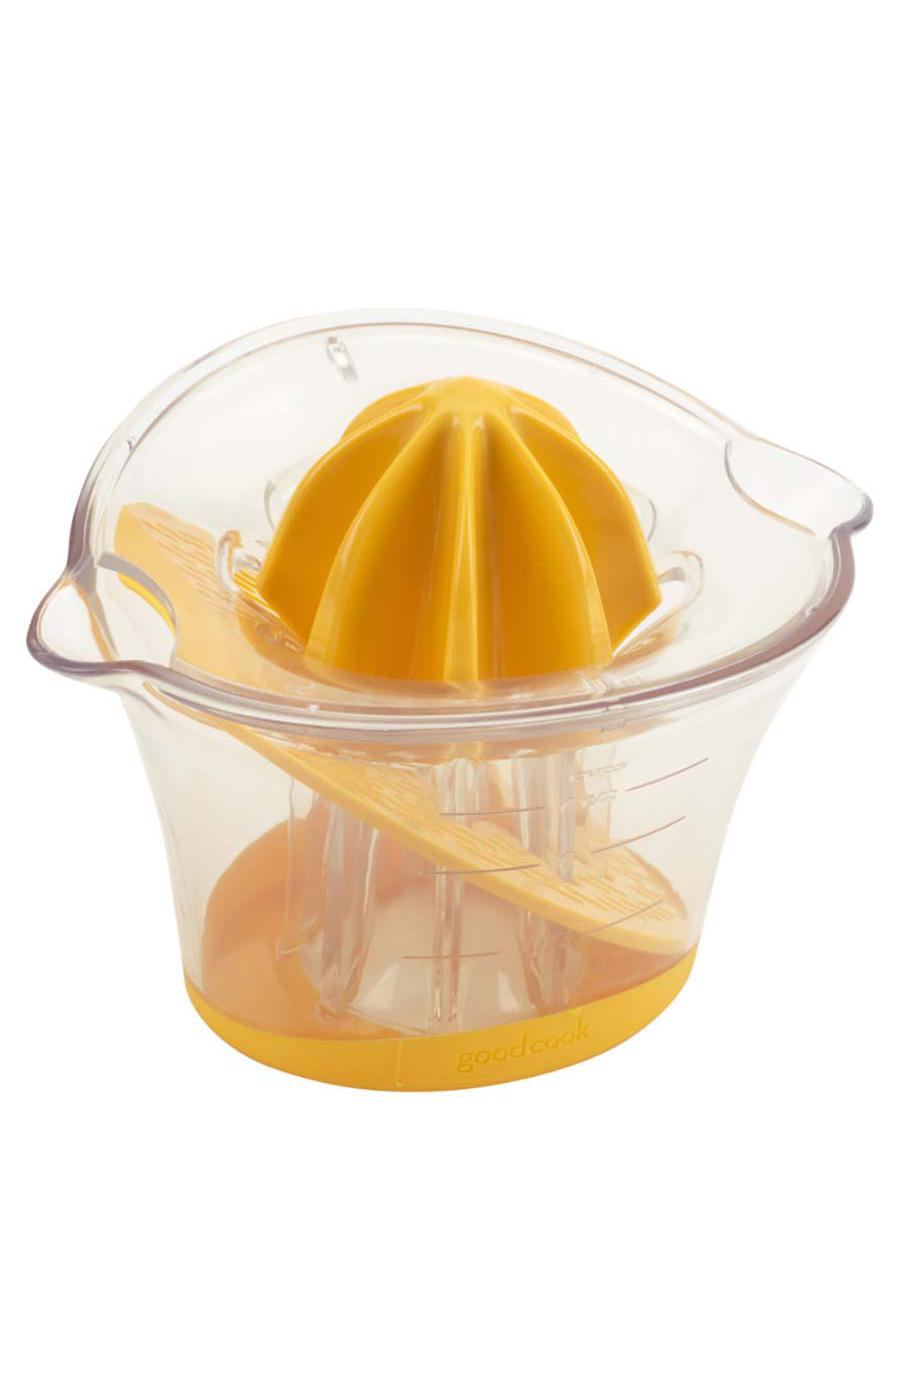 GoodCook Touch 2-in-1 Citrus Juicer; image 2 of 5